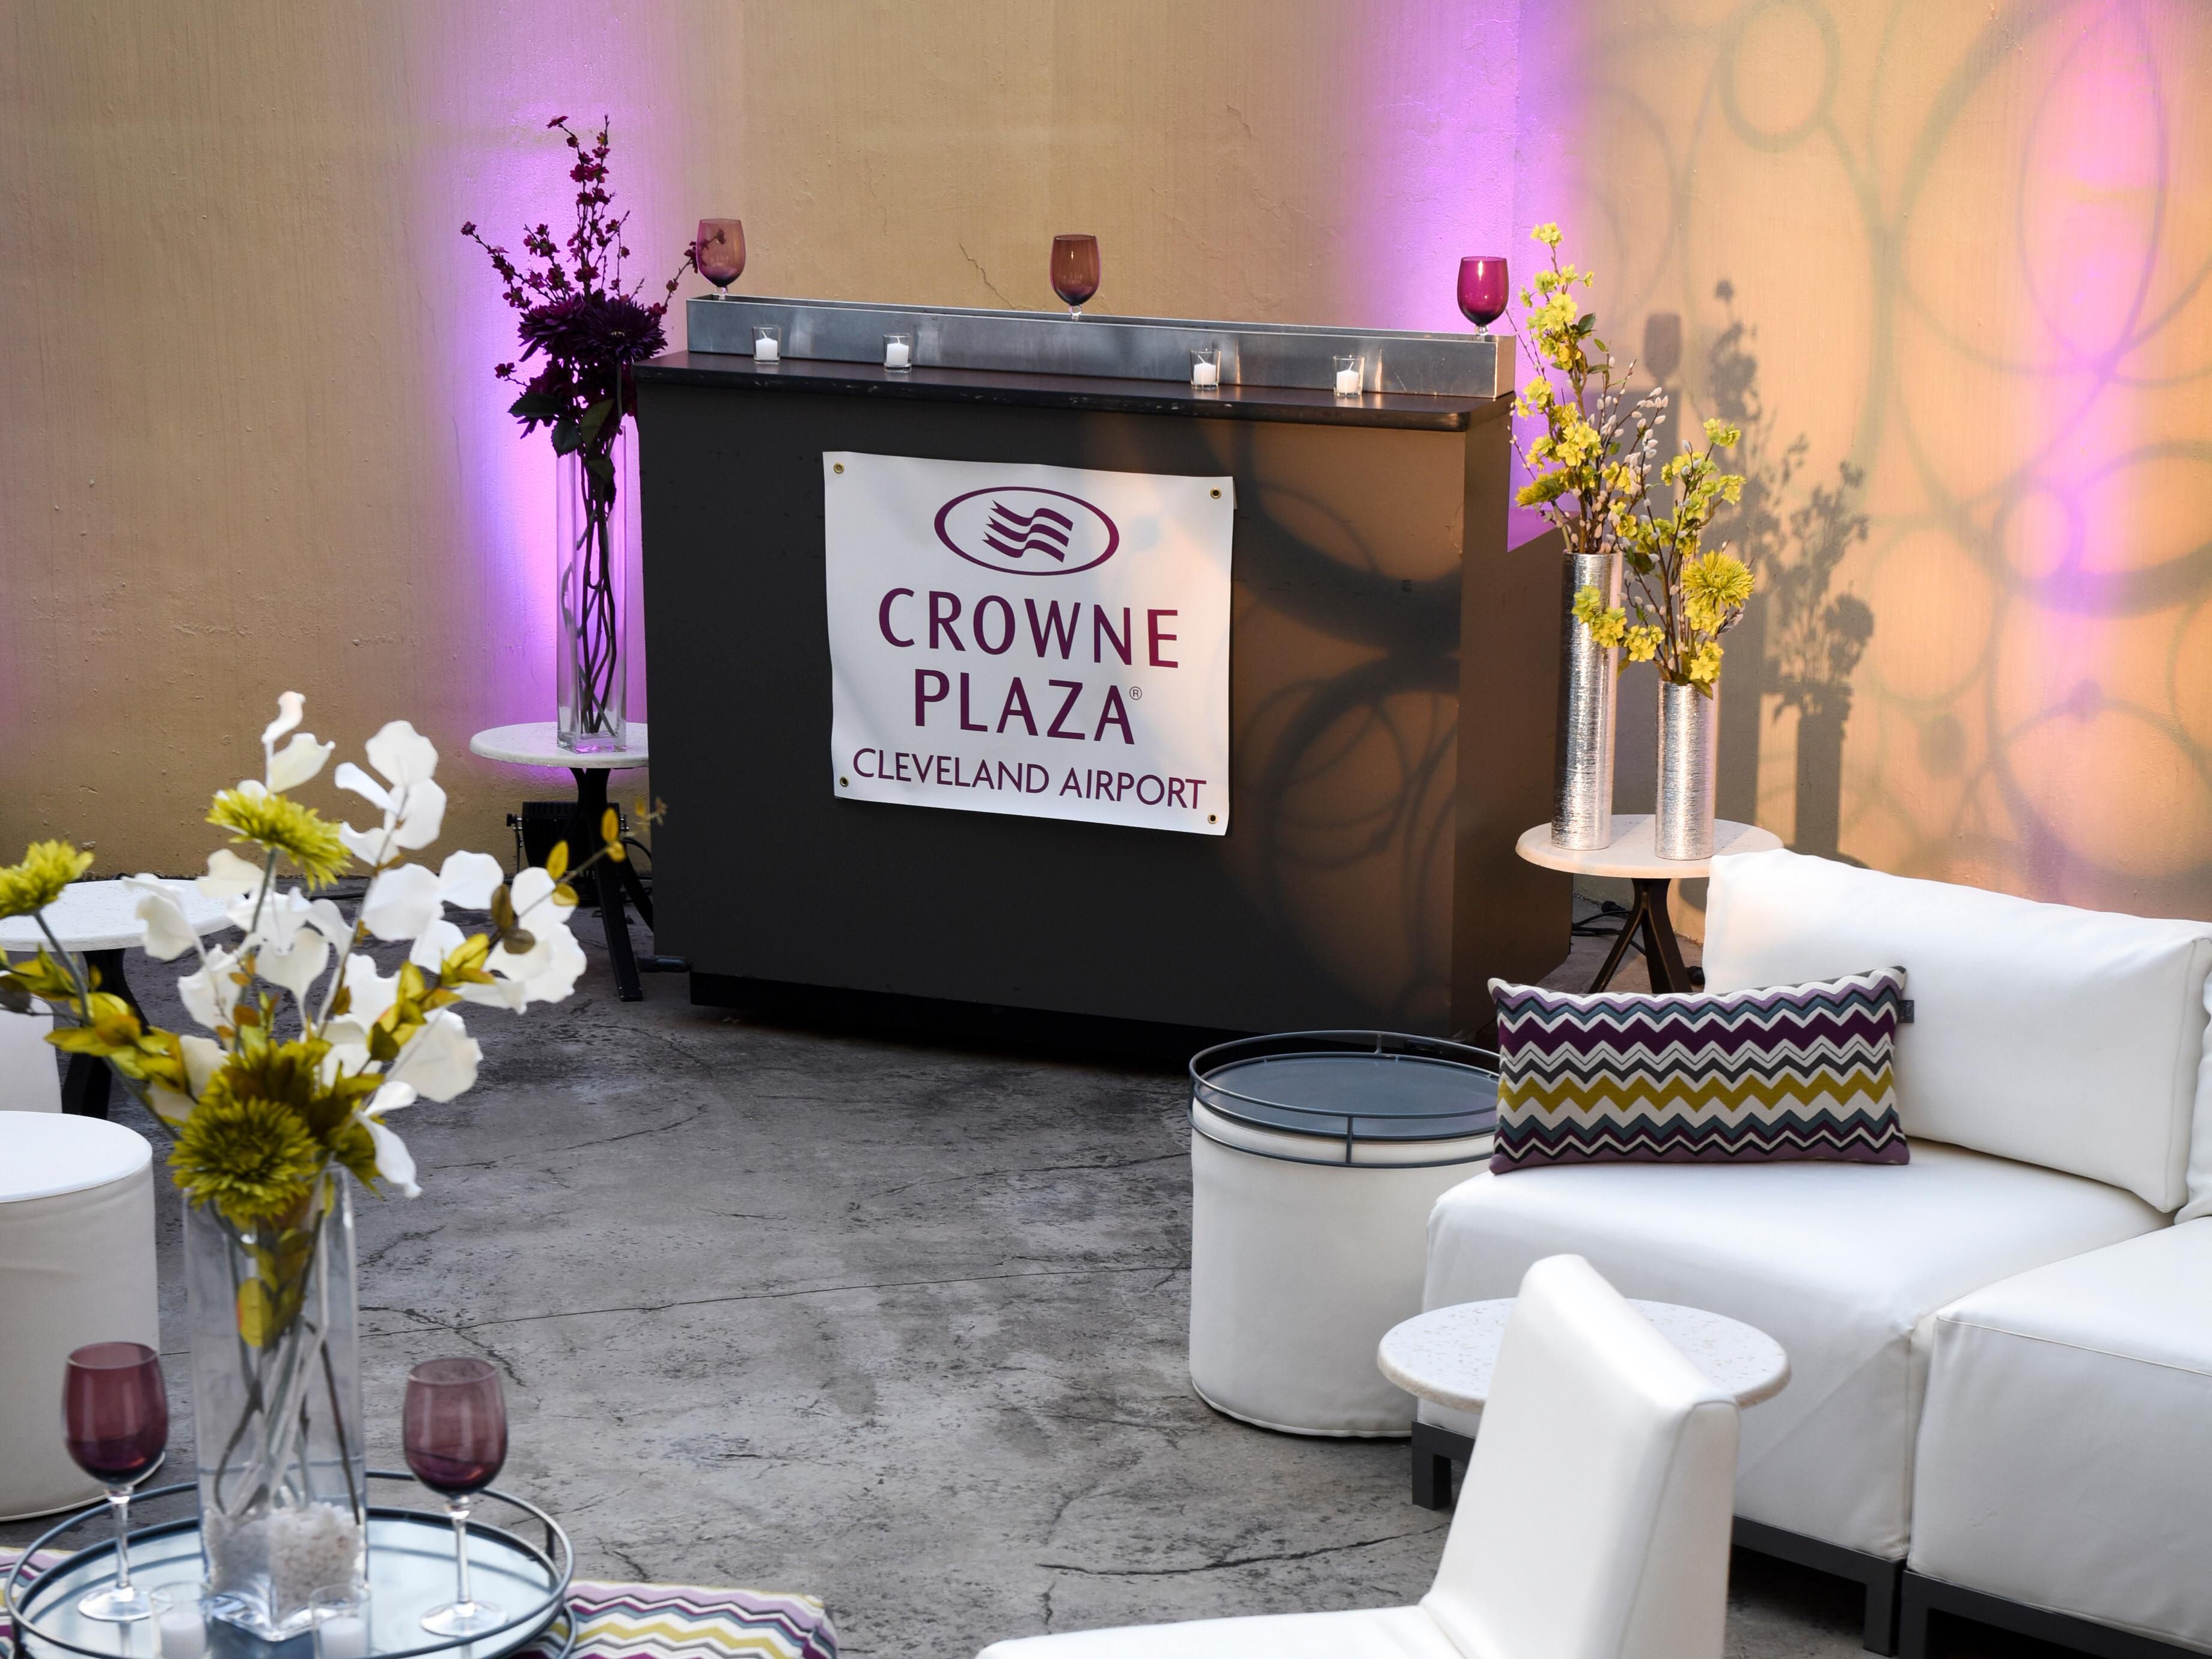 The Crowne Plaza Cleveland Airport provides the perfect environment for your guests to celebrate and cherish your special day. Creating unforgettable memories from your engagement to your wedding reception and all the milestones in between.  Provide guests with an overnight stay option at special rates.